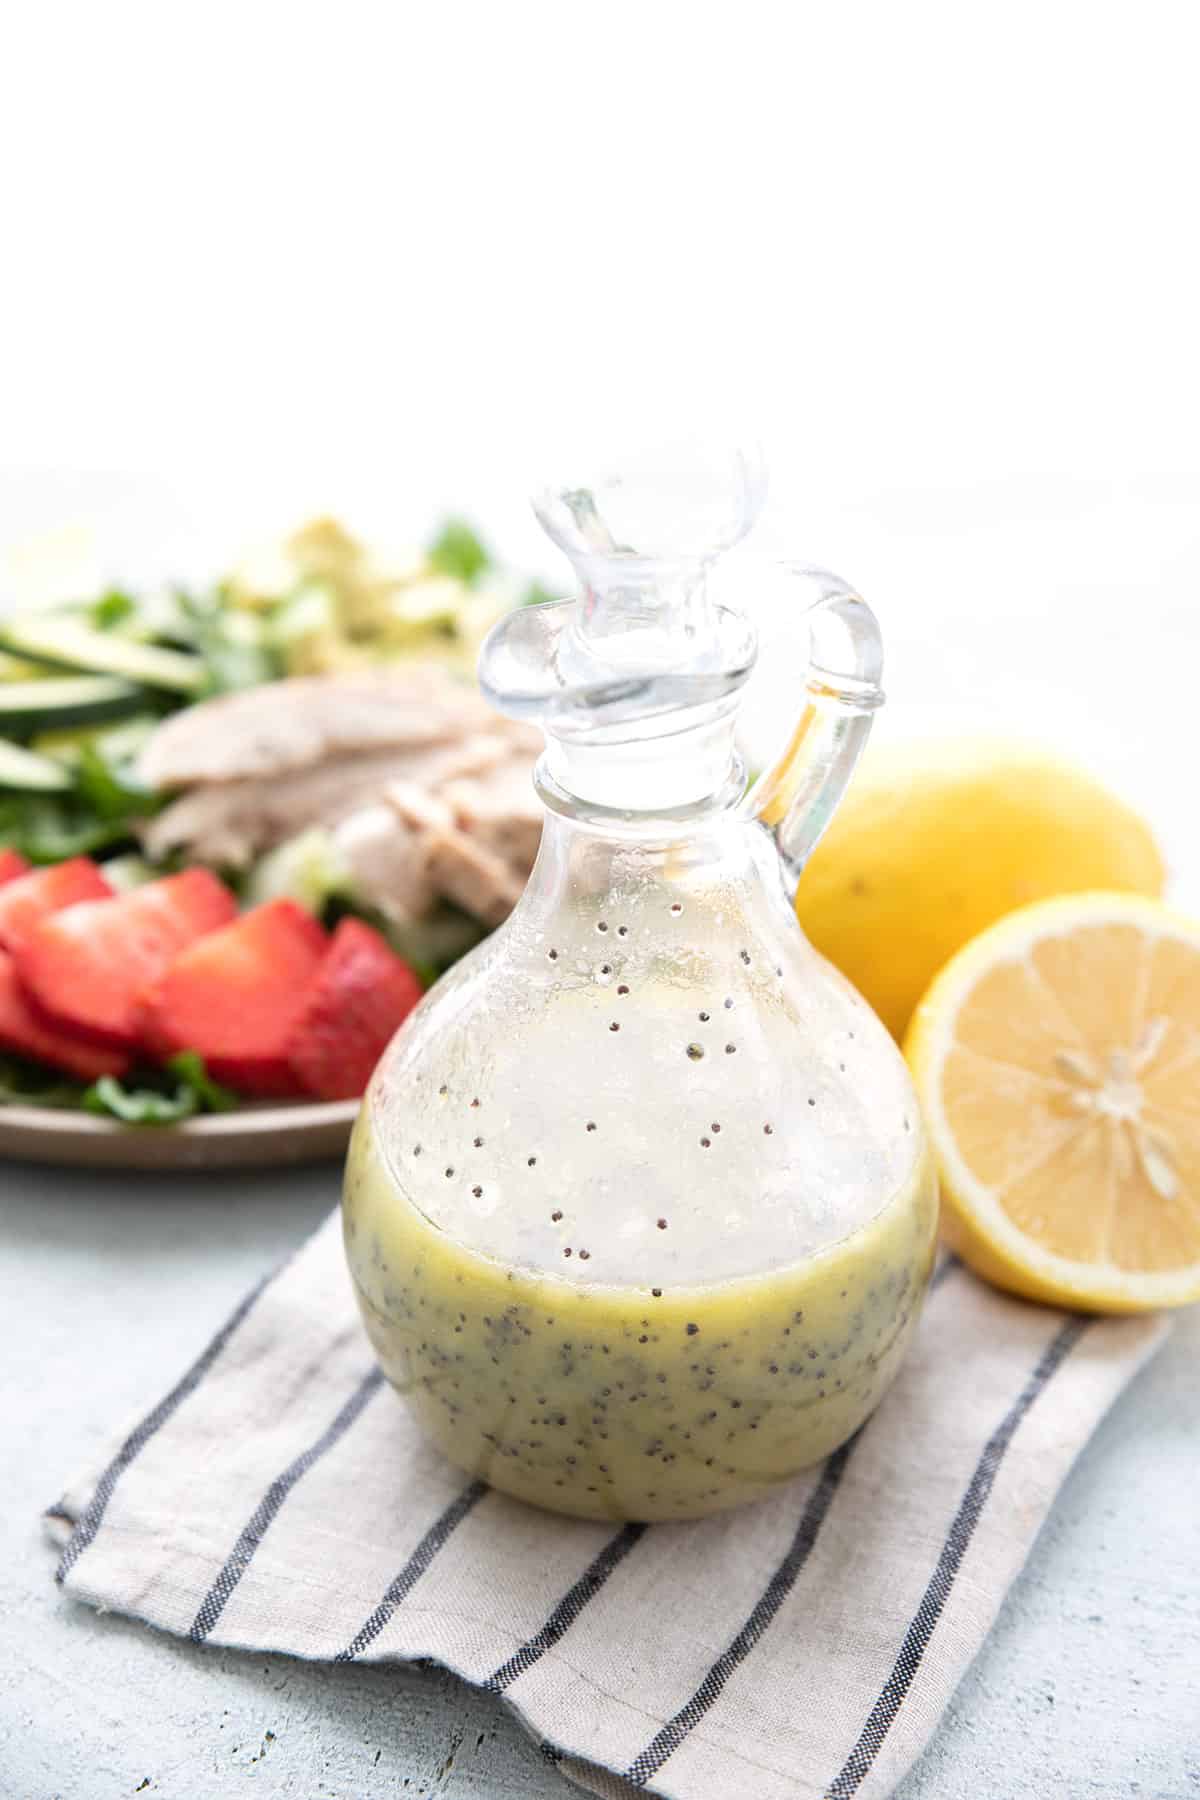 Keto Lemon Poppy Seed Dressing on a striped napkin with lemons and salad in the background.